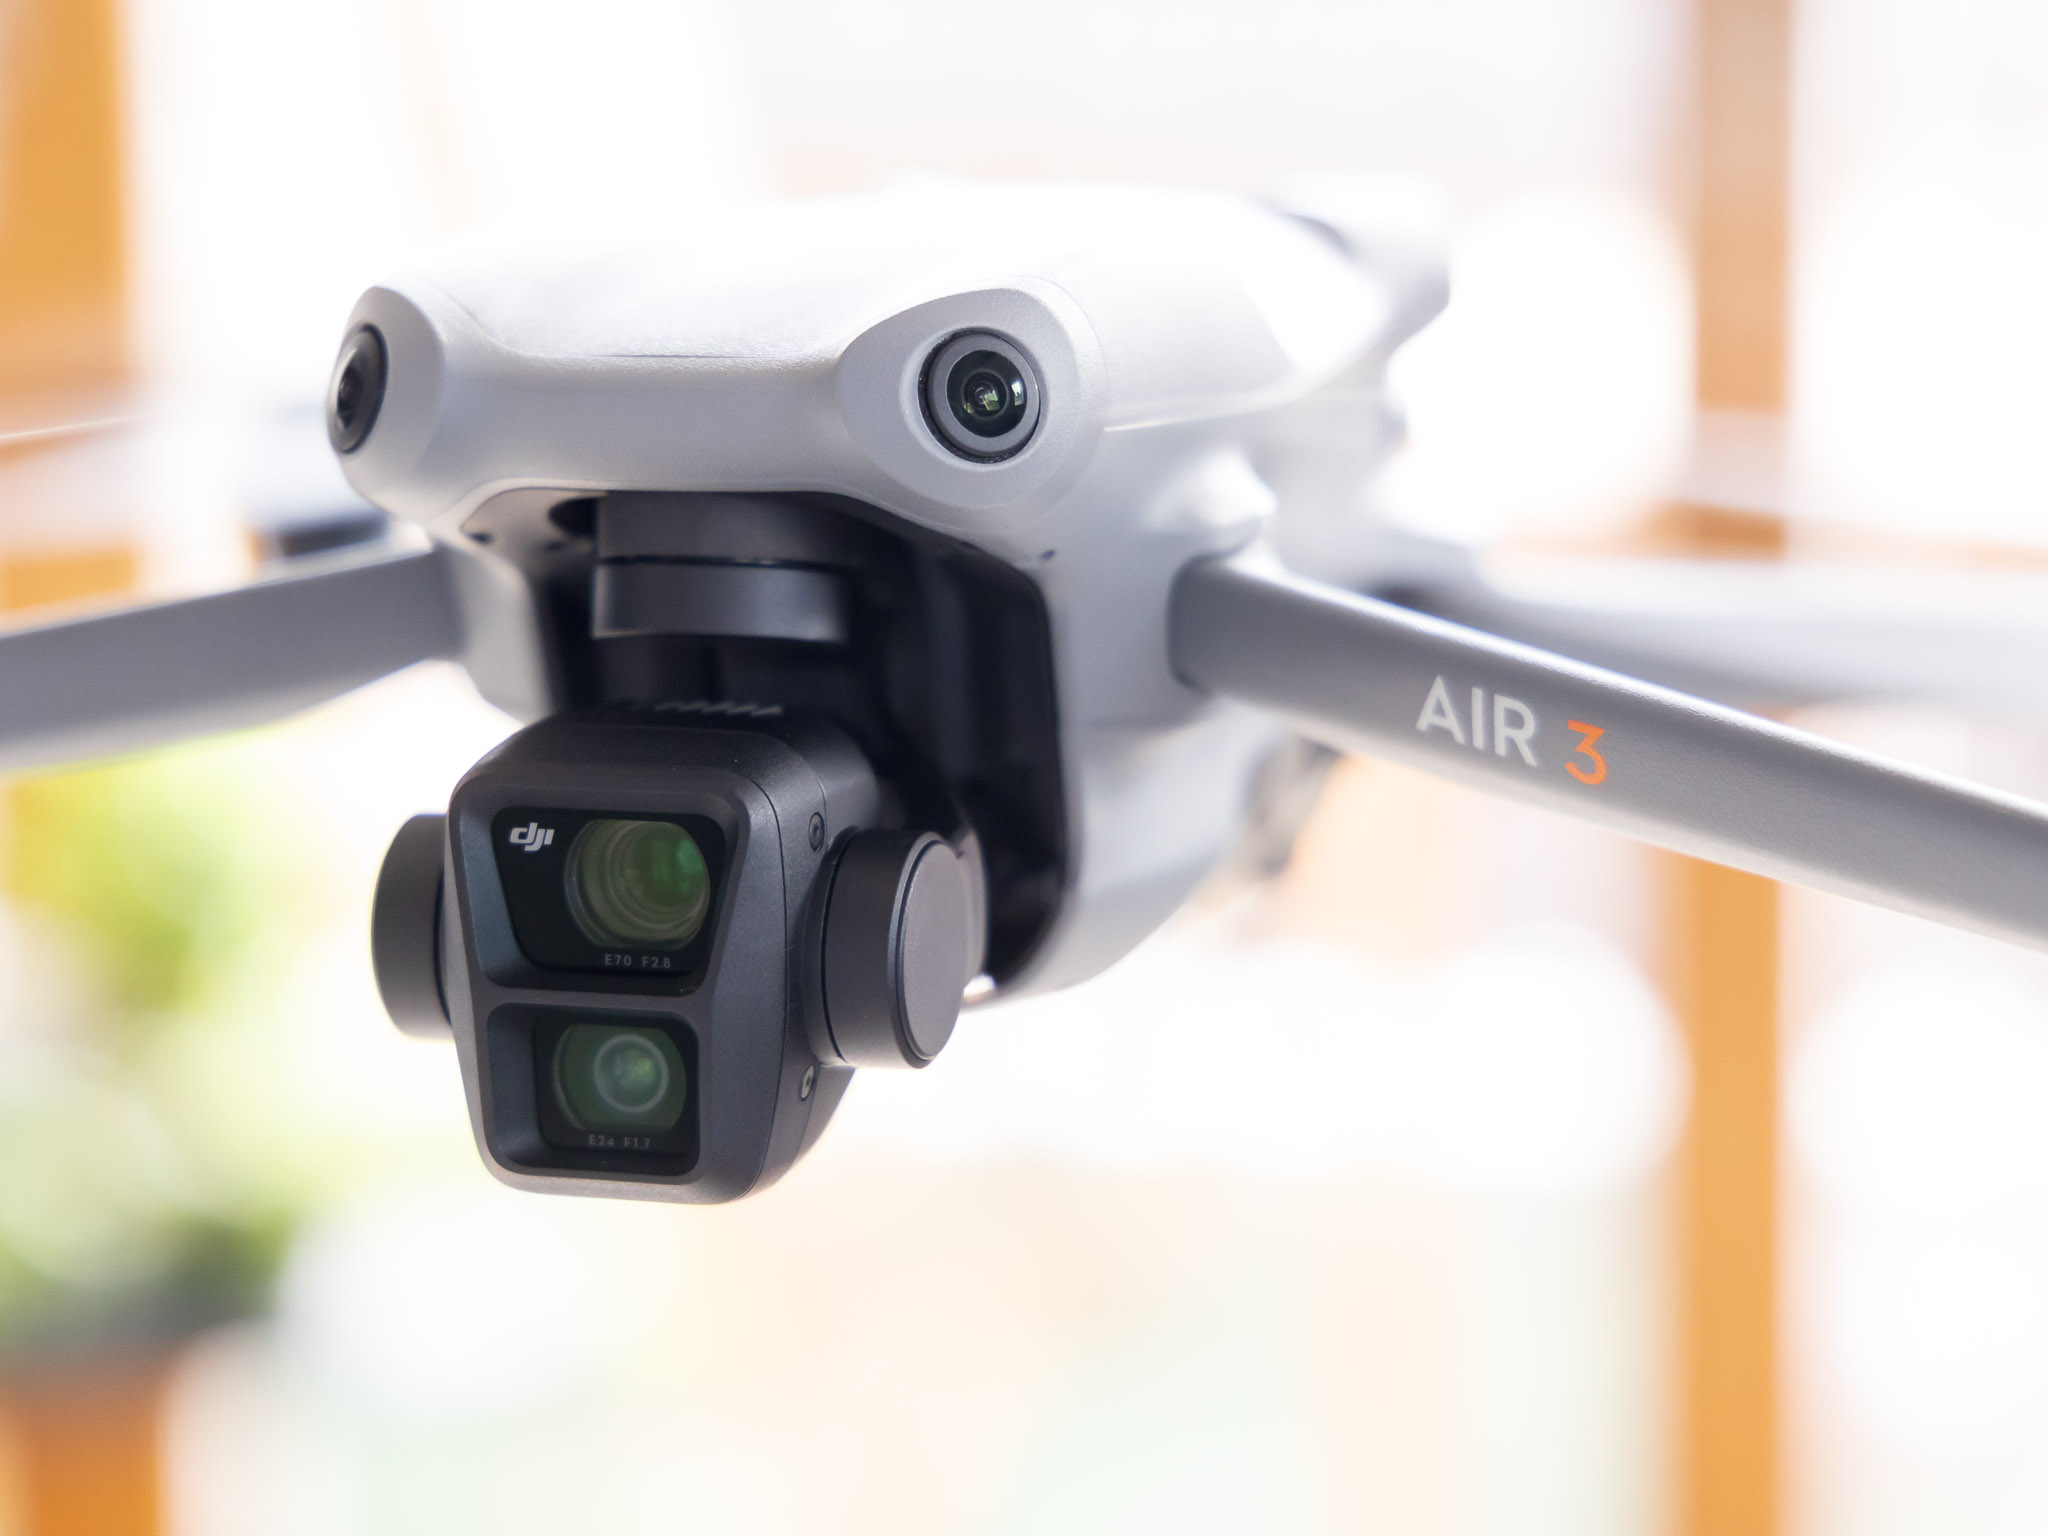 You are currently viewing DJI Air 3 - first experiences in photography